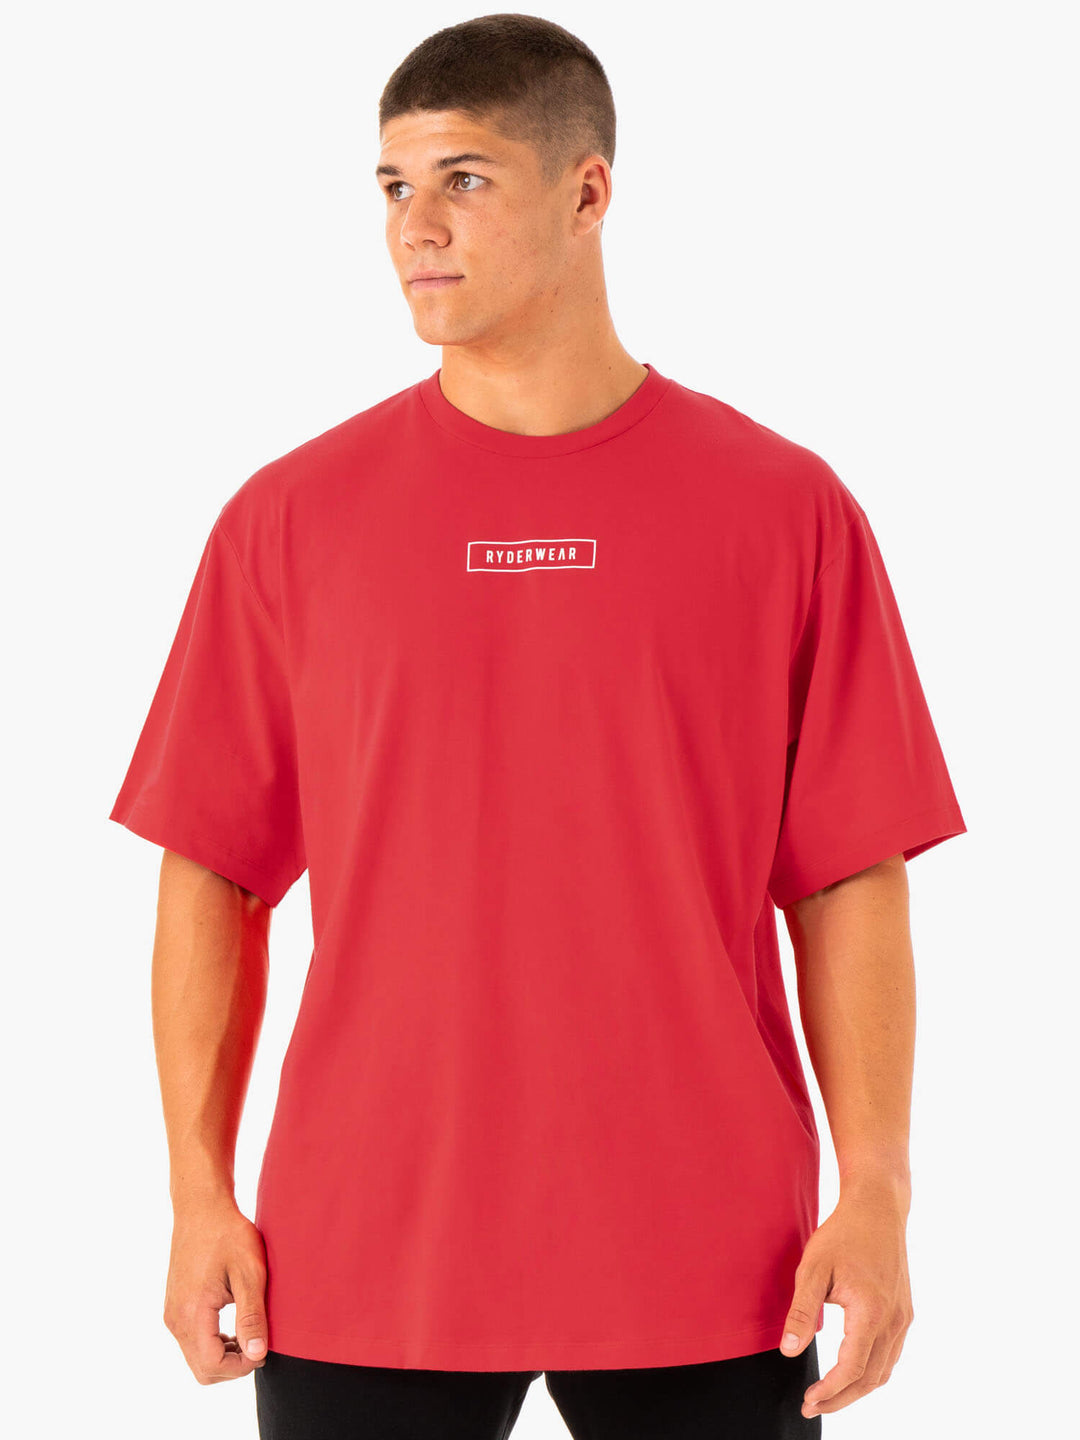 Recharge T-Shirt - Red Clothing Ryderwear 